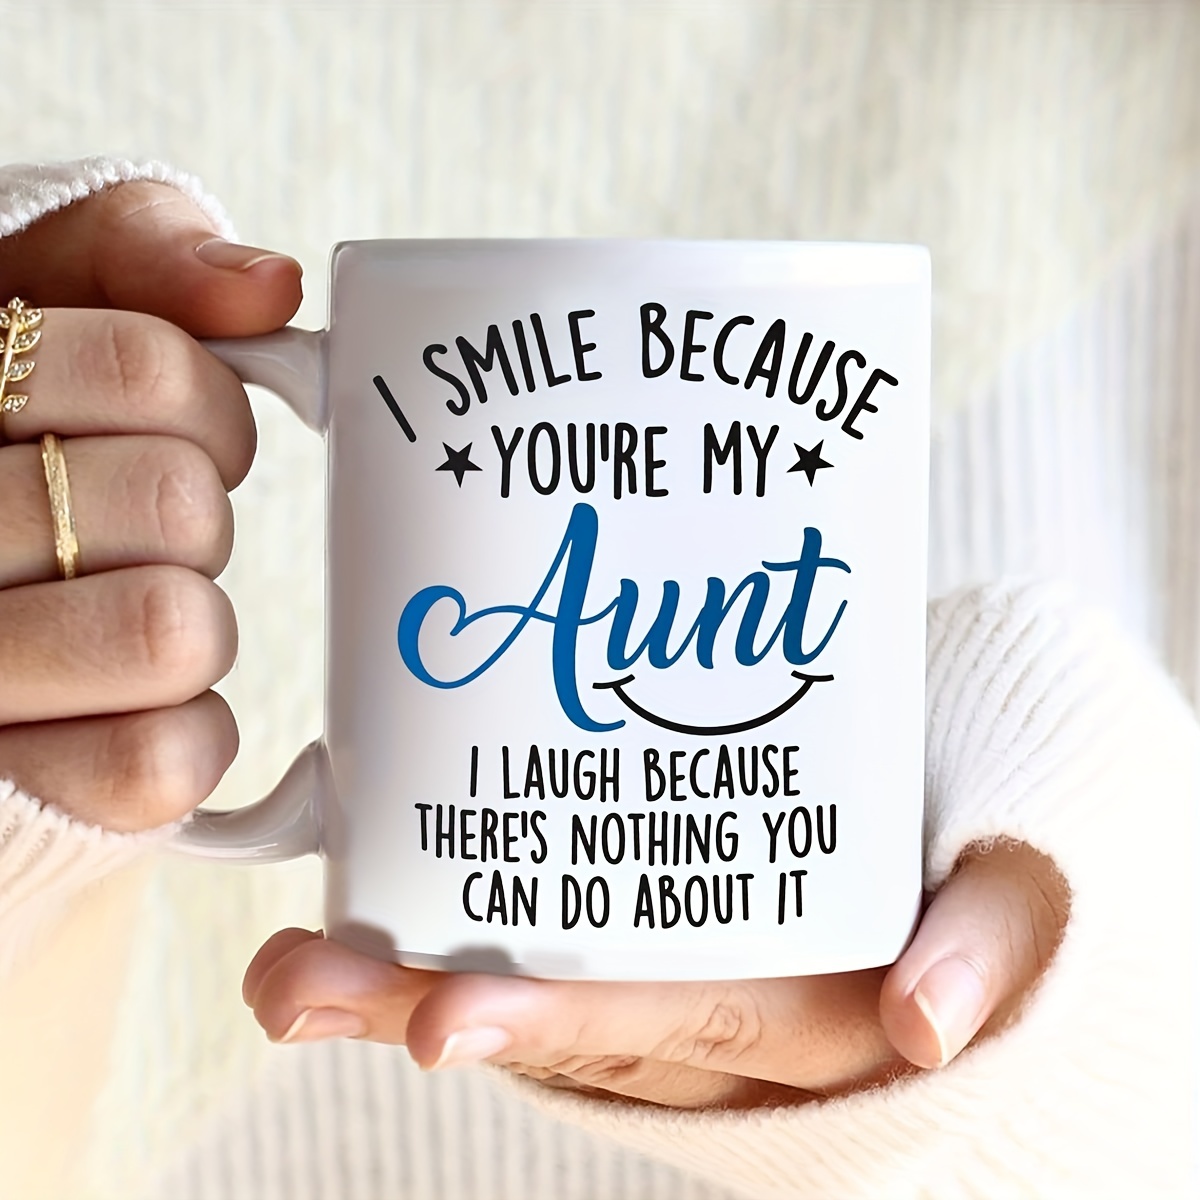 Best Auntie Gifts - 20 oz Tumbler Christmas Gift for Auntie, Aunts from  Niece, Nephew Insulated Travel Cup Unique Thanksgiving Birthday Present  Boxed Aunt Gift for Women/New Aunt/Aunt to Be/Great Aunt 